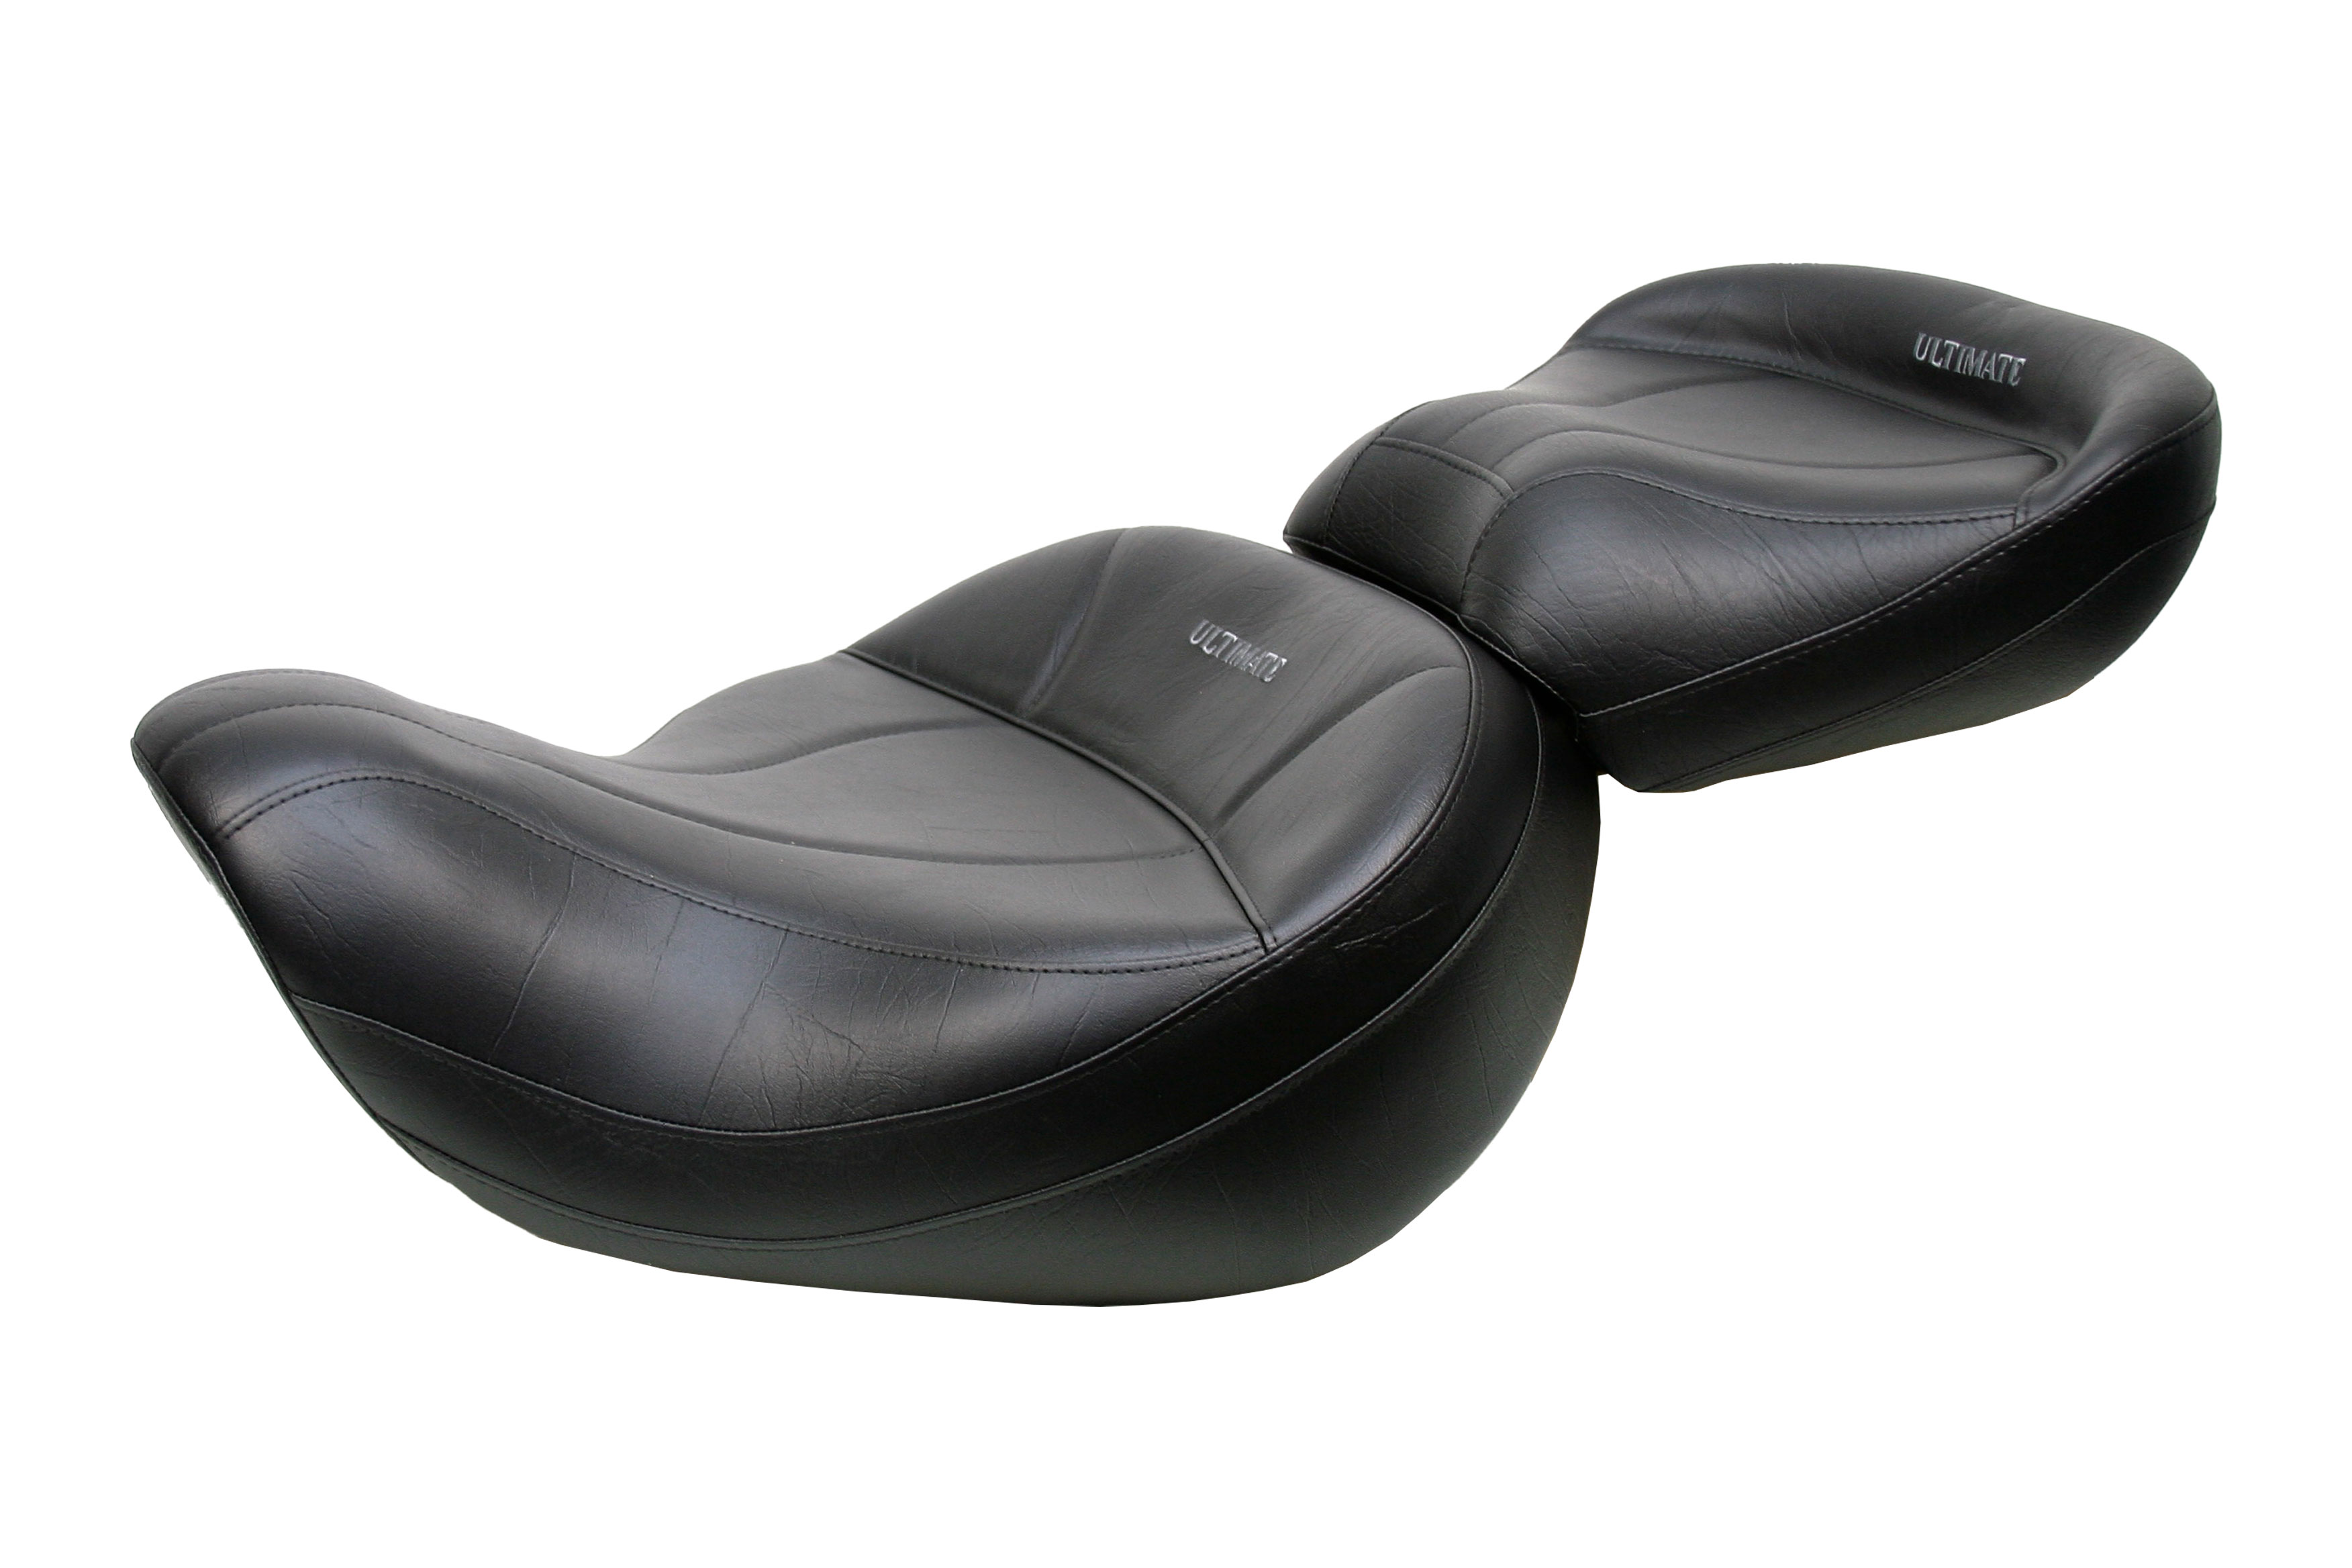 Valkyrie Standard / Tourer King Seat and Passenger Seat - Plain or Studded - (1996 - 2003)